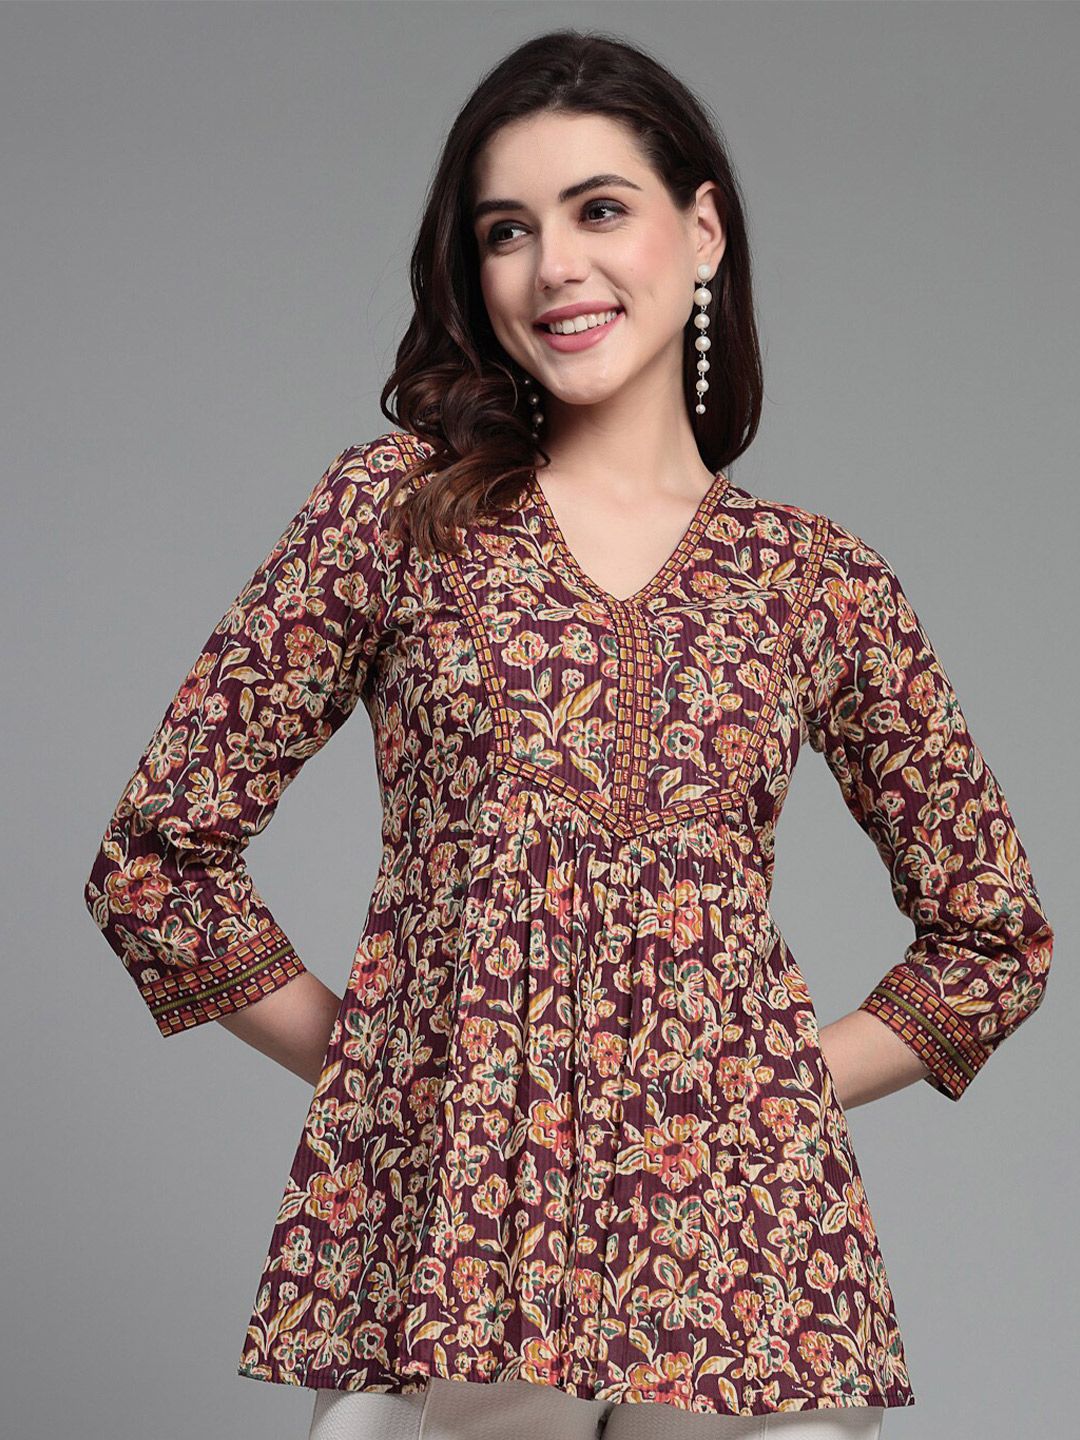 QOMN Floral Printed V-Neck Gathered Pure Cotton Empire Top Price in India